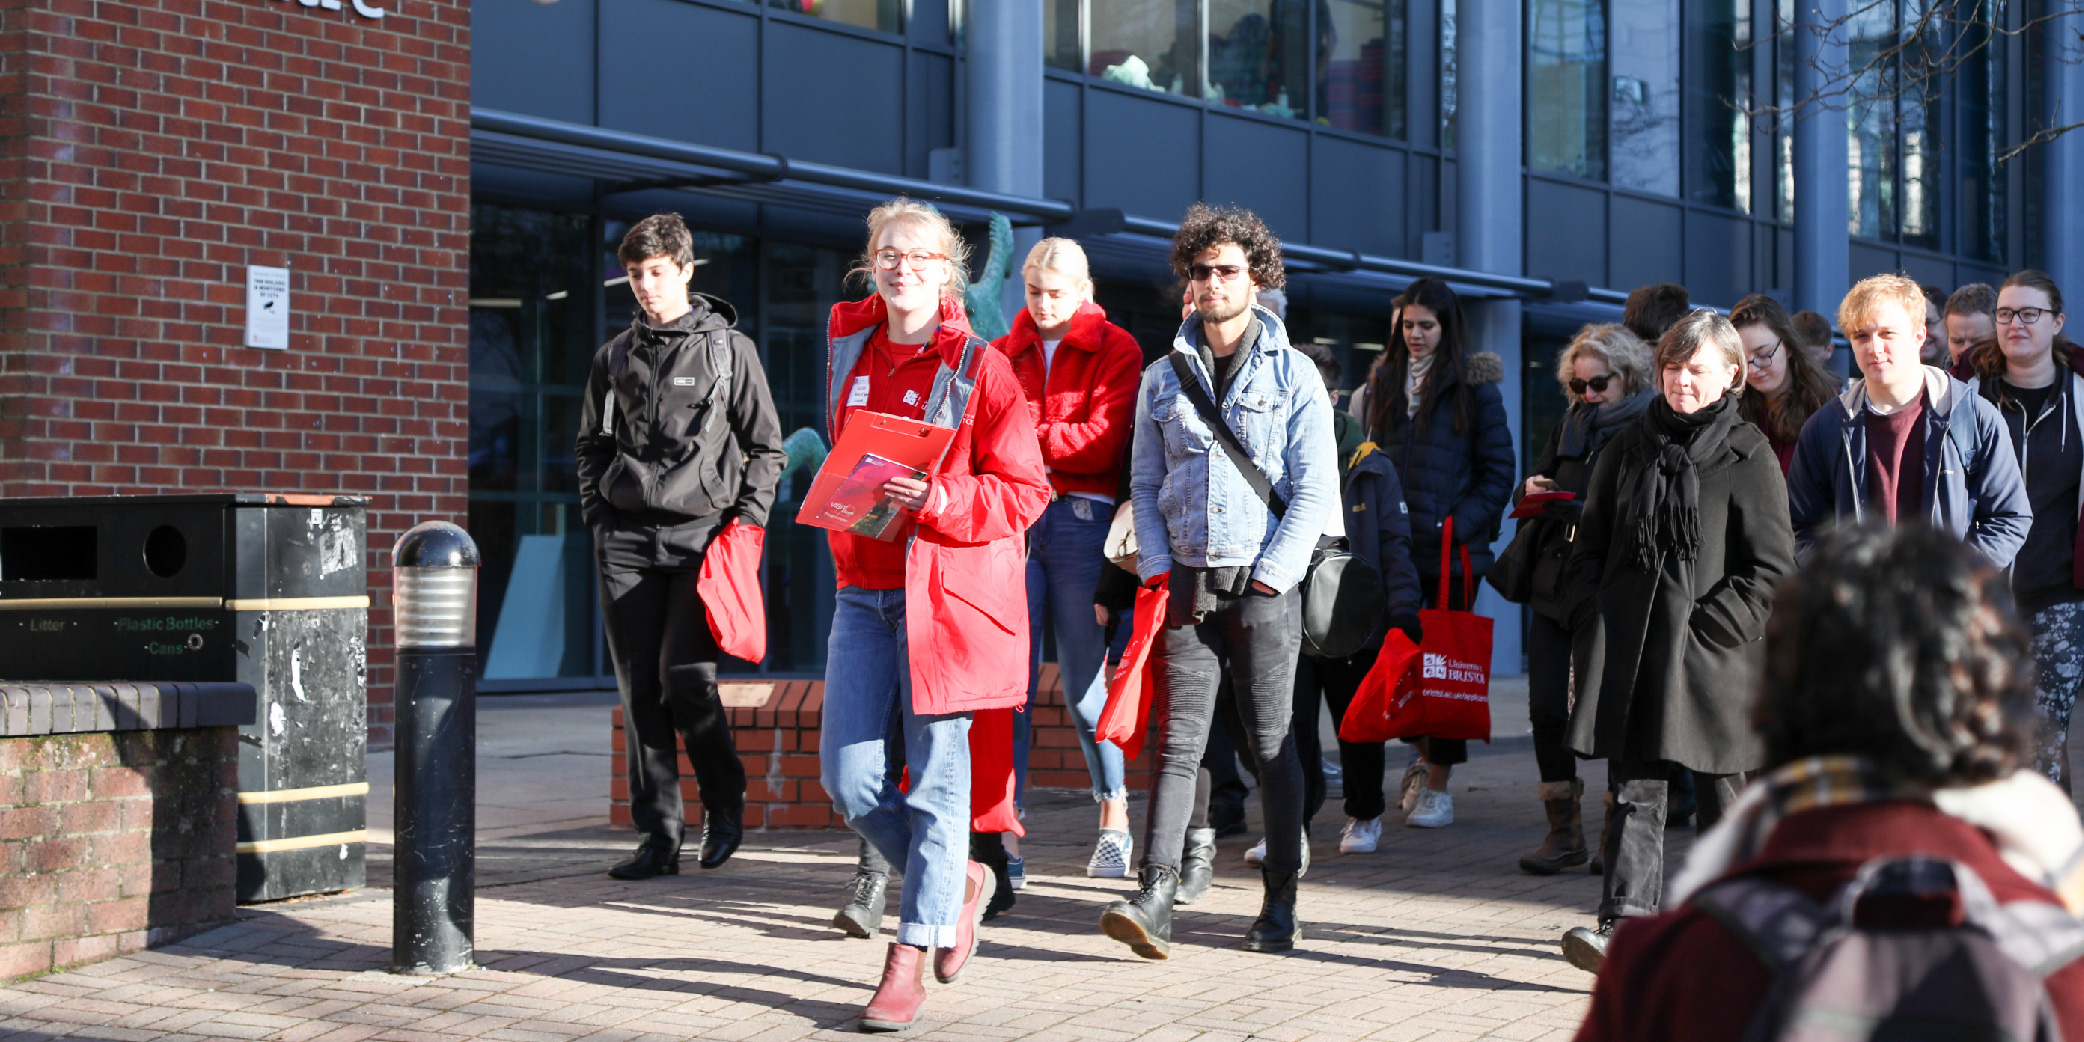 A student ambassador leading a group of people on a tour of the University of Bristol campus